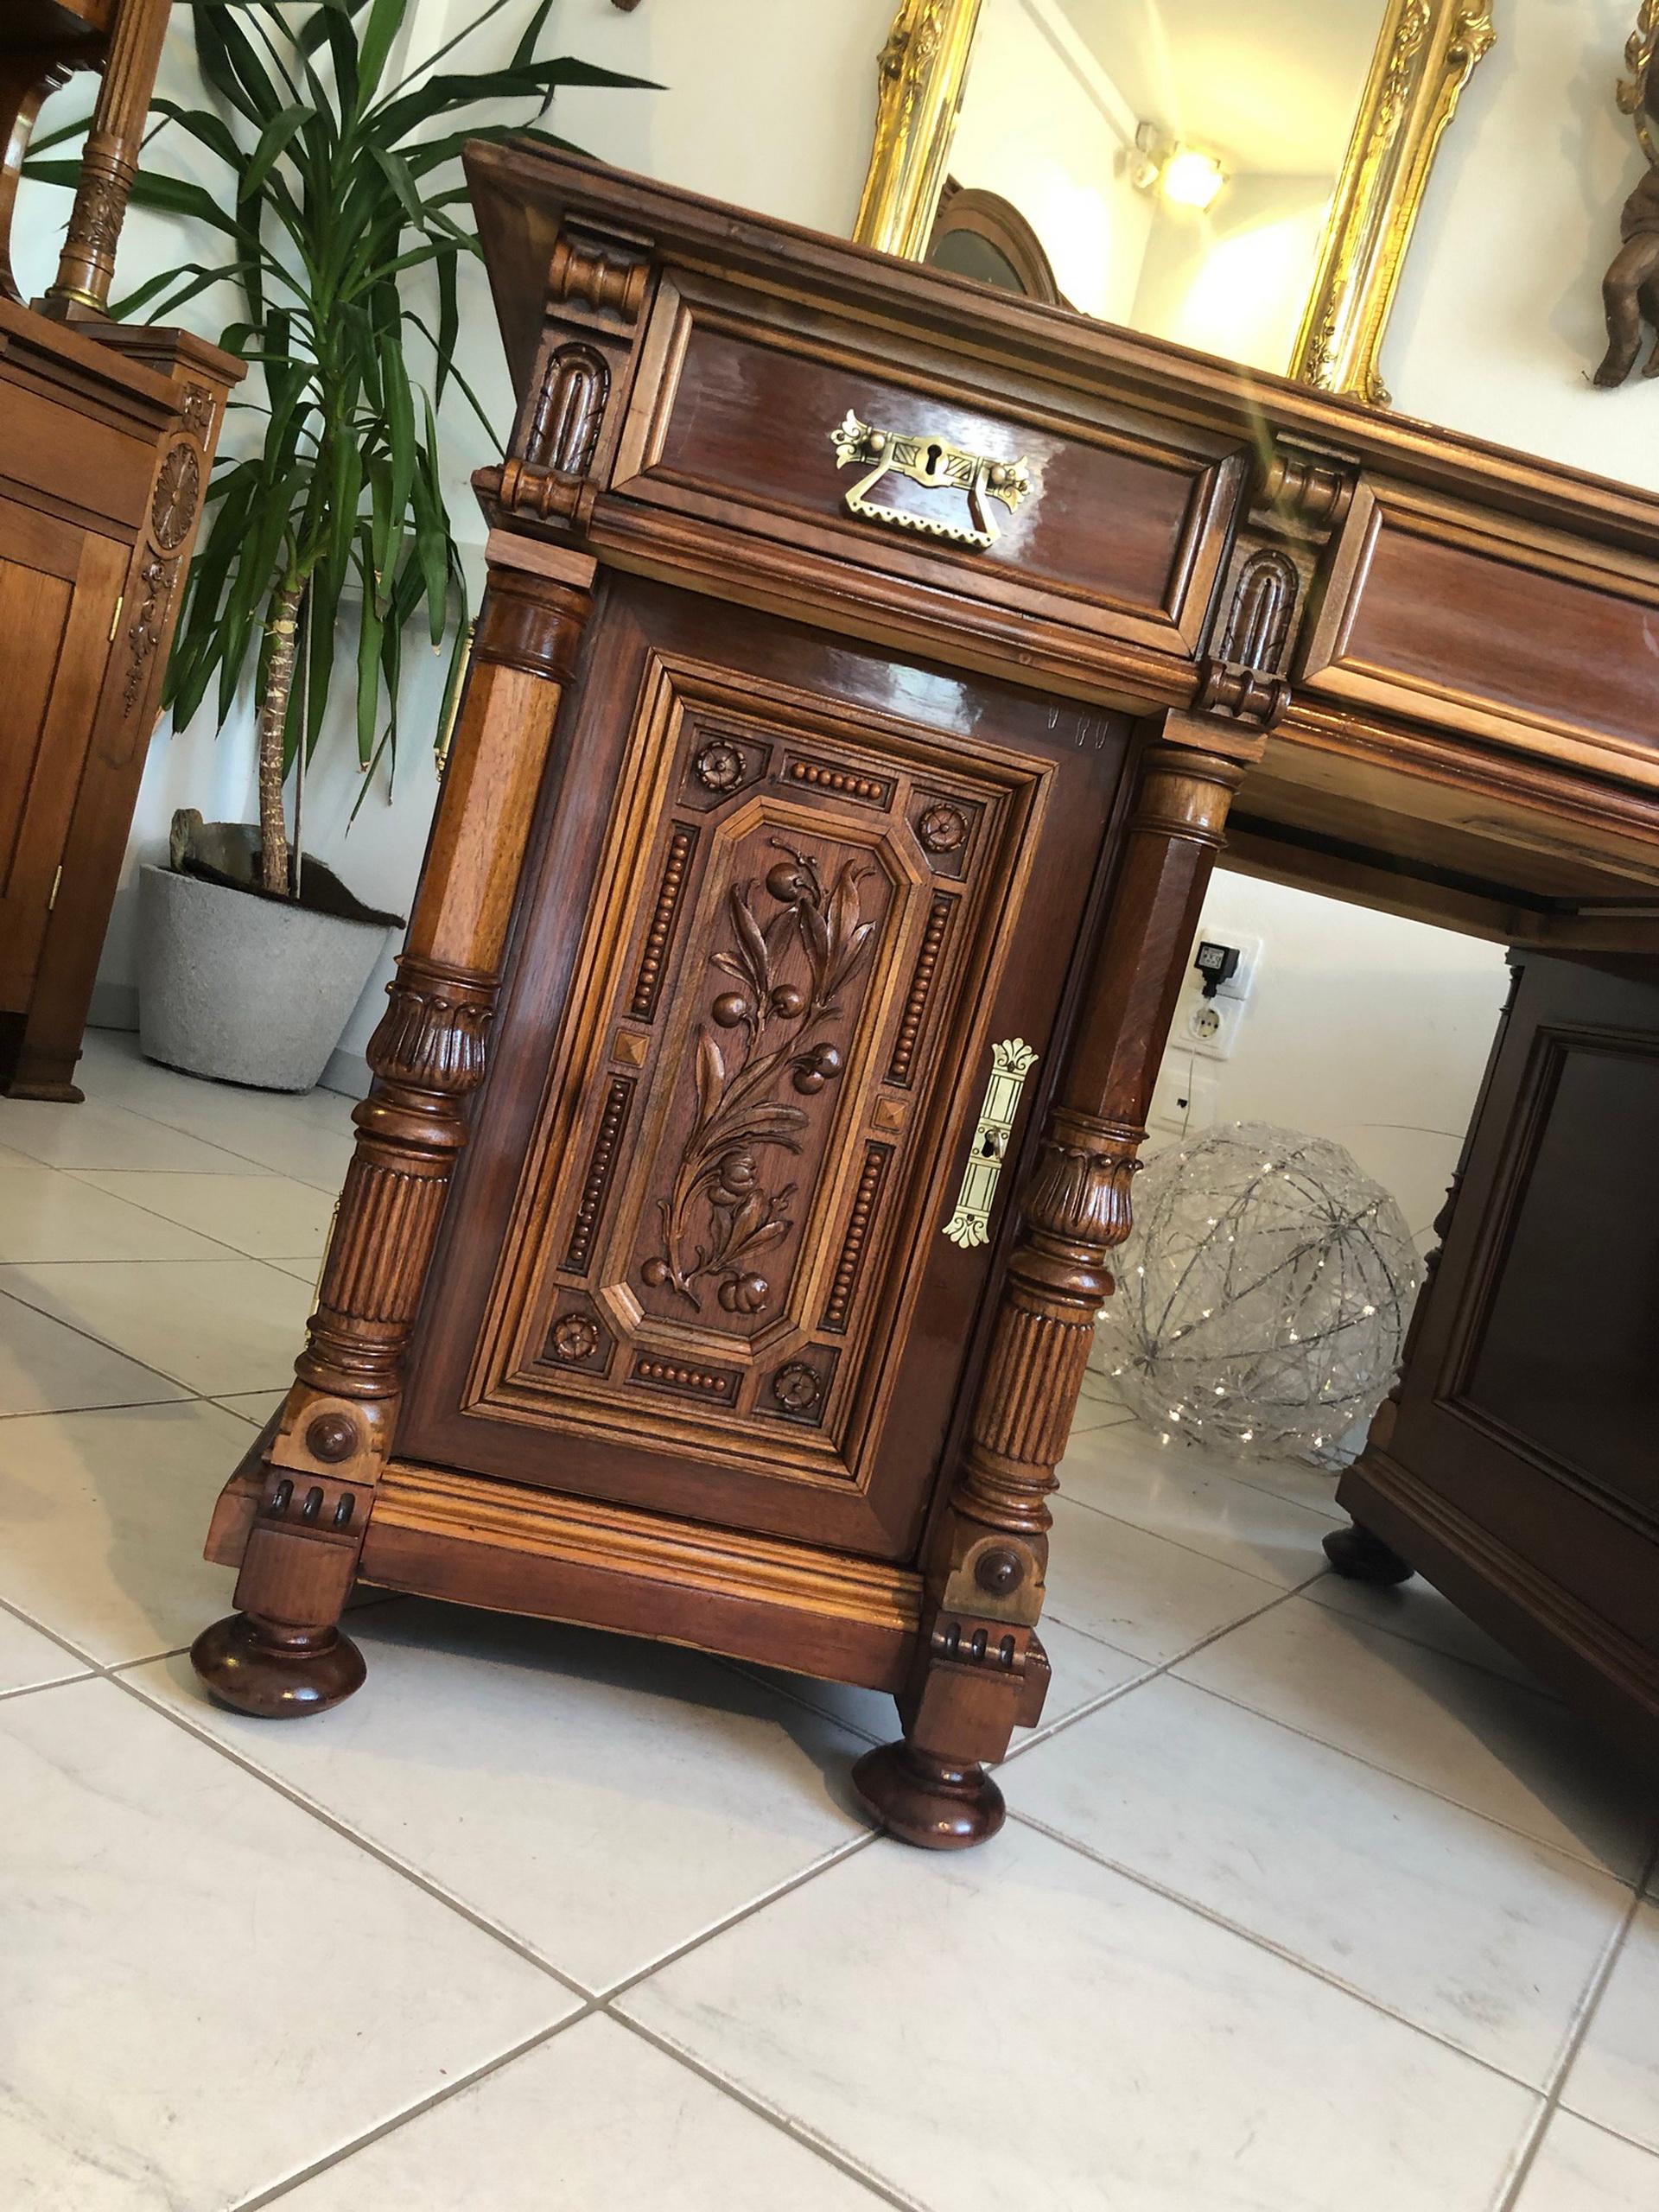 Freshly restored neoclassical bureau or wirting table from Vienna, Austria around 1875. Build in the Gründerzeit era out of solid oak wood the antique piece features beautiful floral carving works as well as columns. It is finished and offers